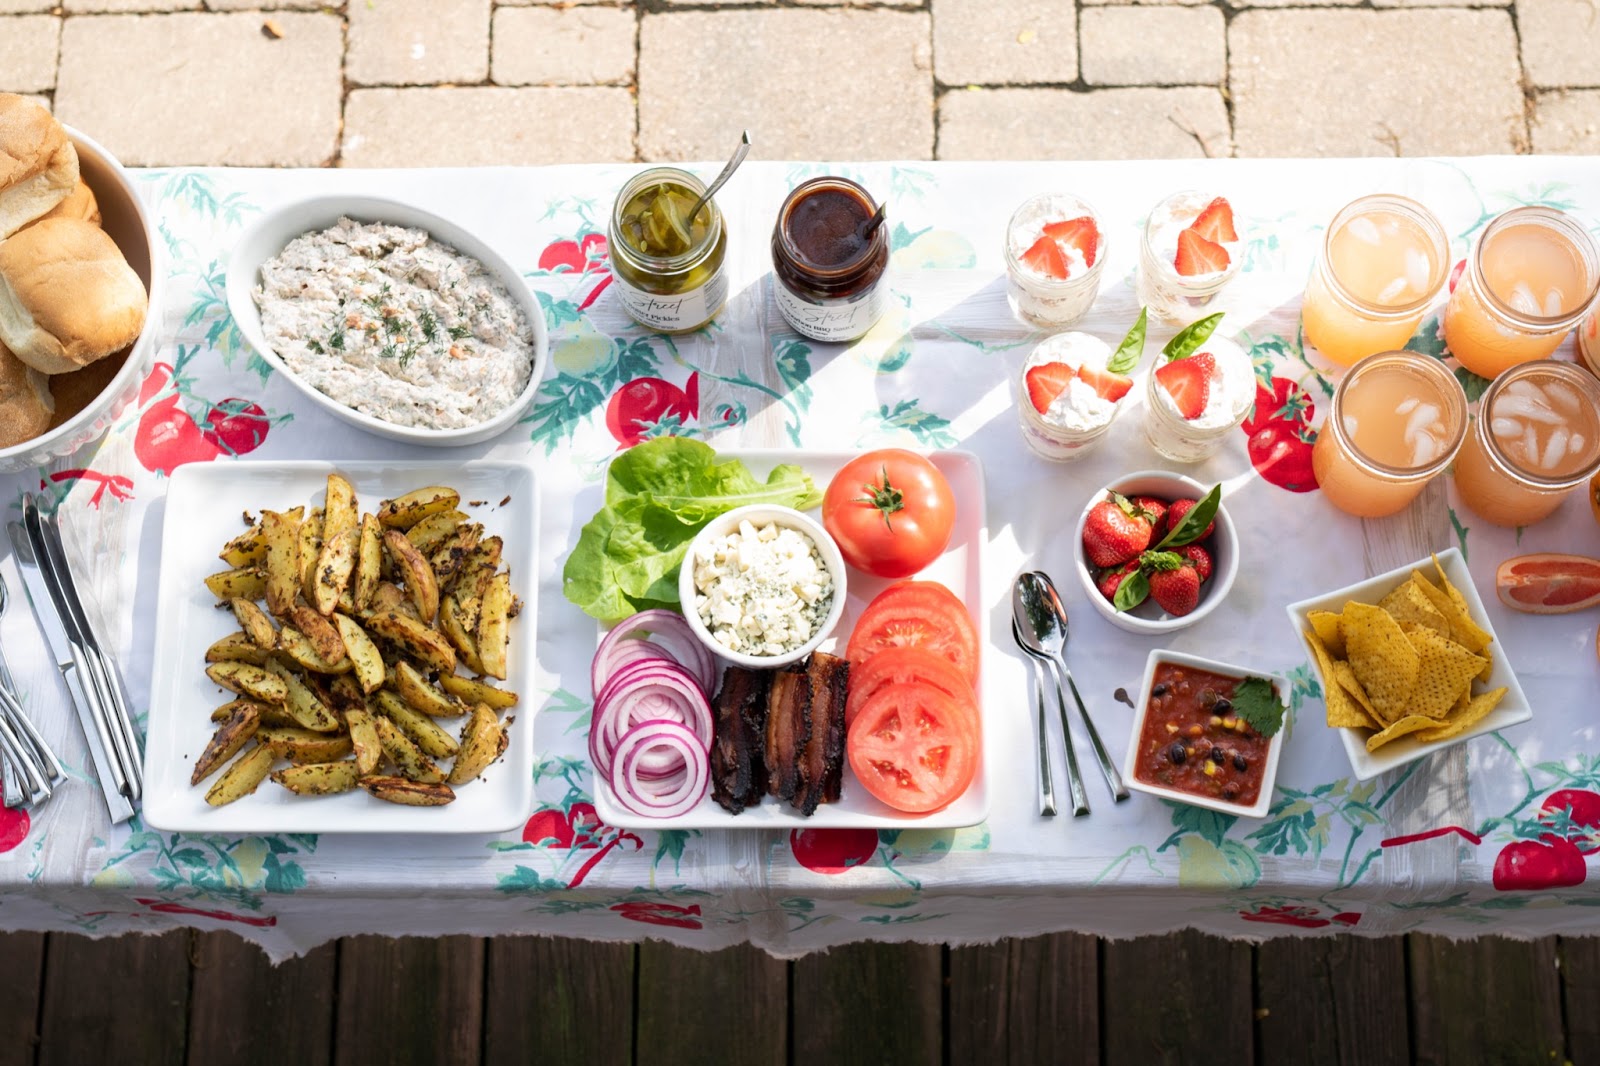 An ultimate backyard barbecue spread. Pear & Simple gift shop in Port Washington, Wisconsin shares their tips for a simple ultimate backyard BBQ